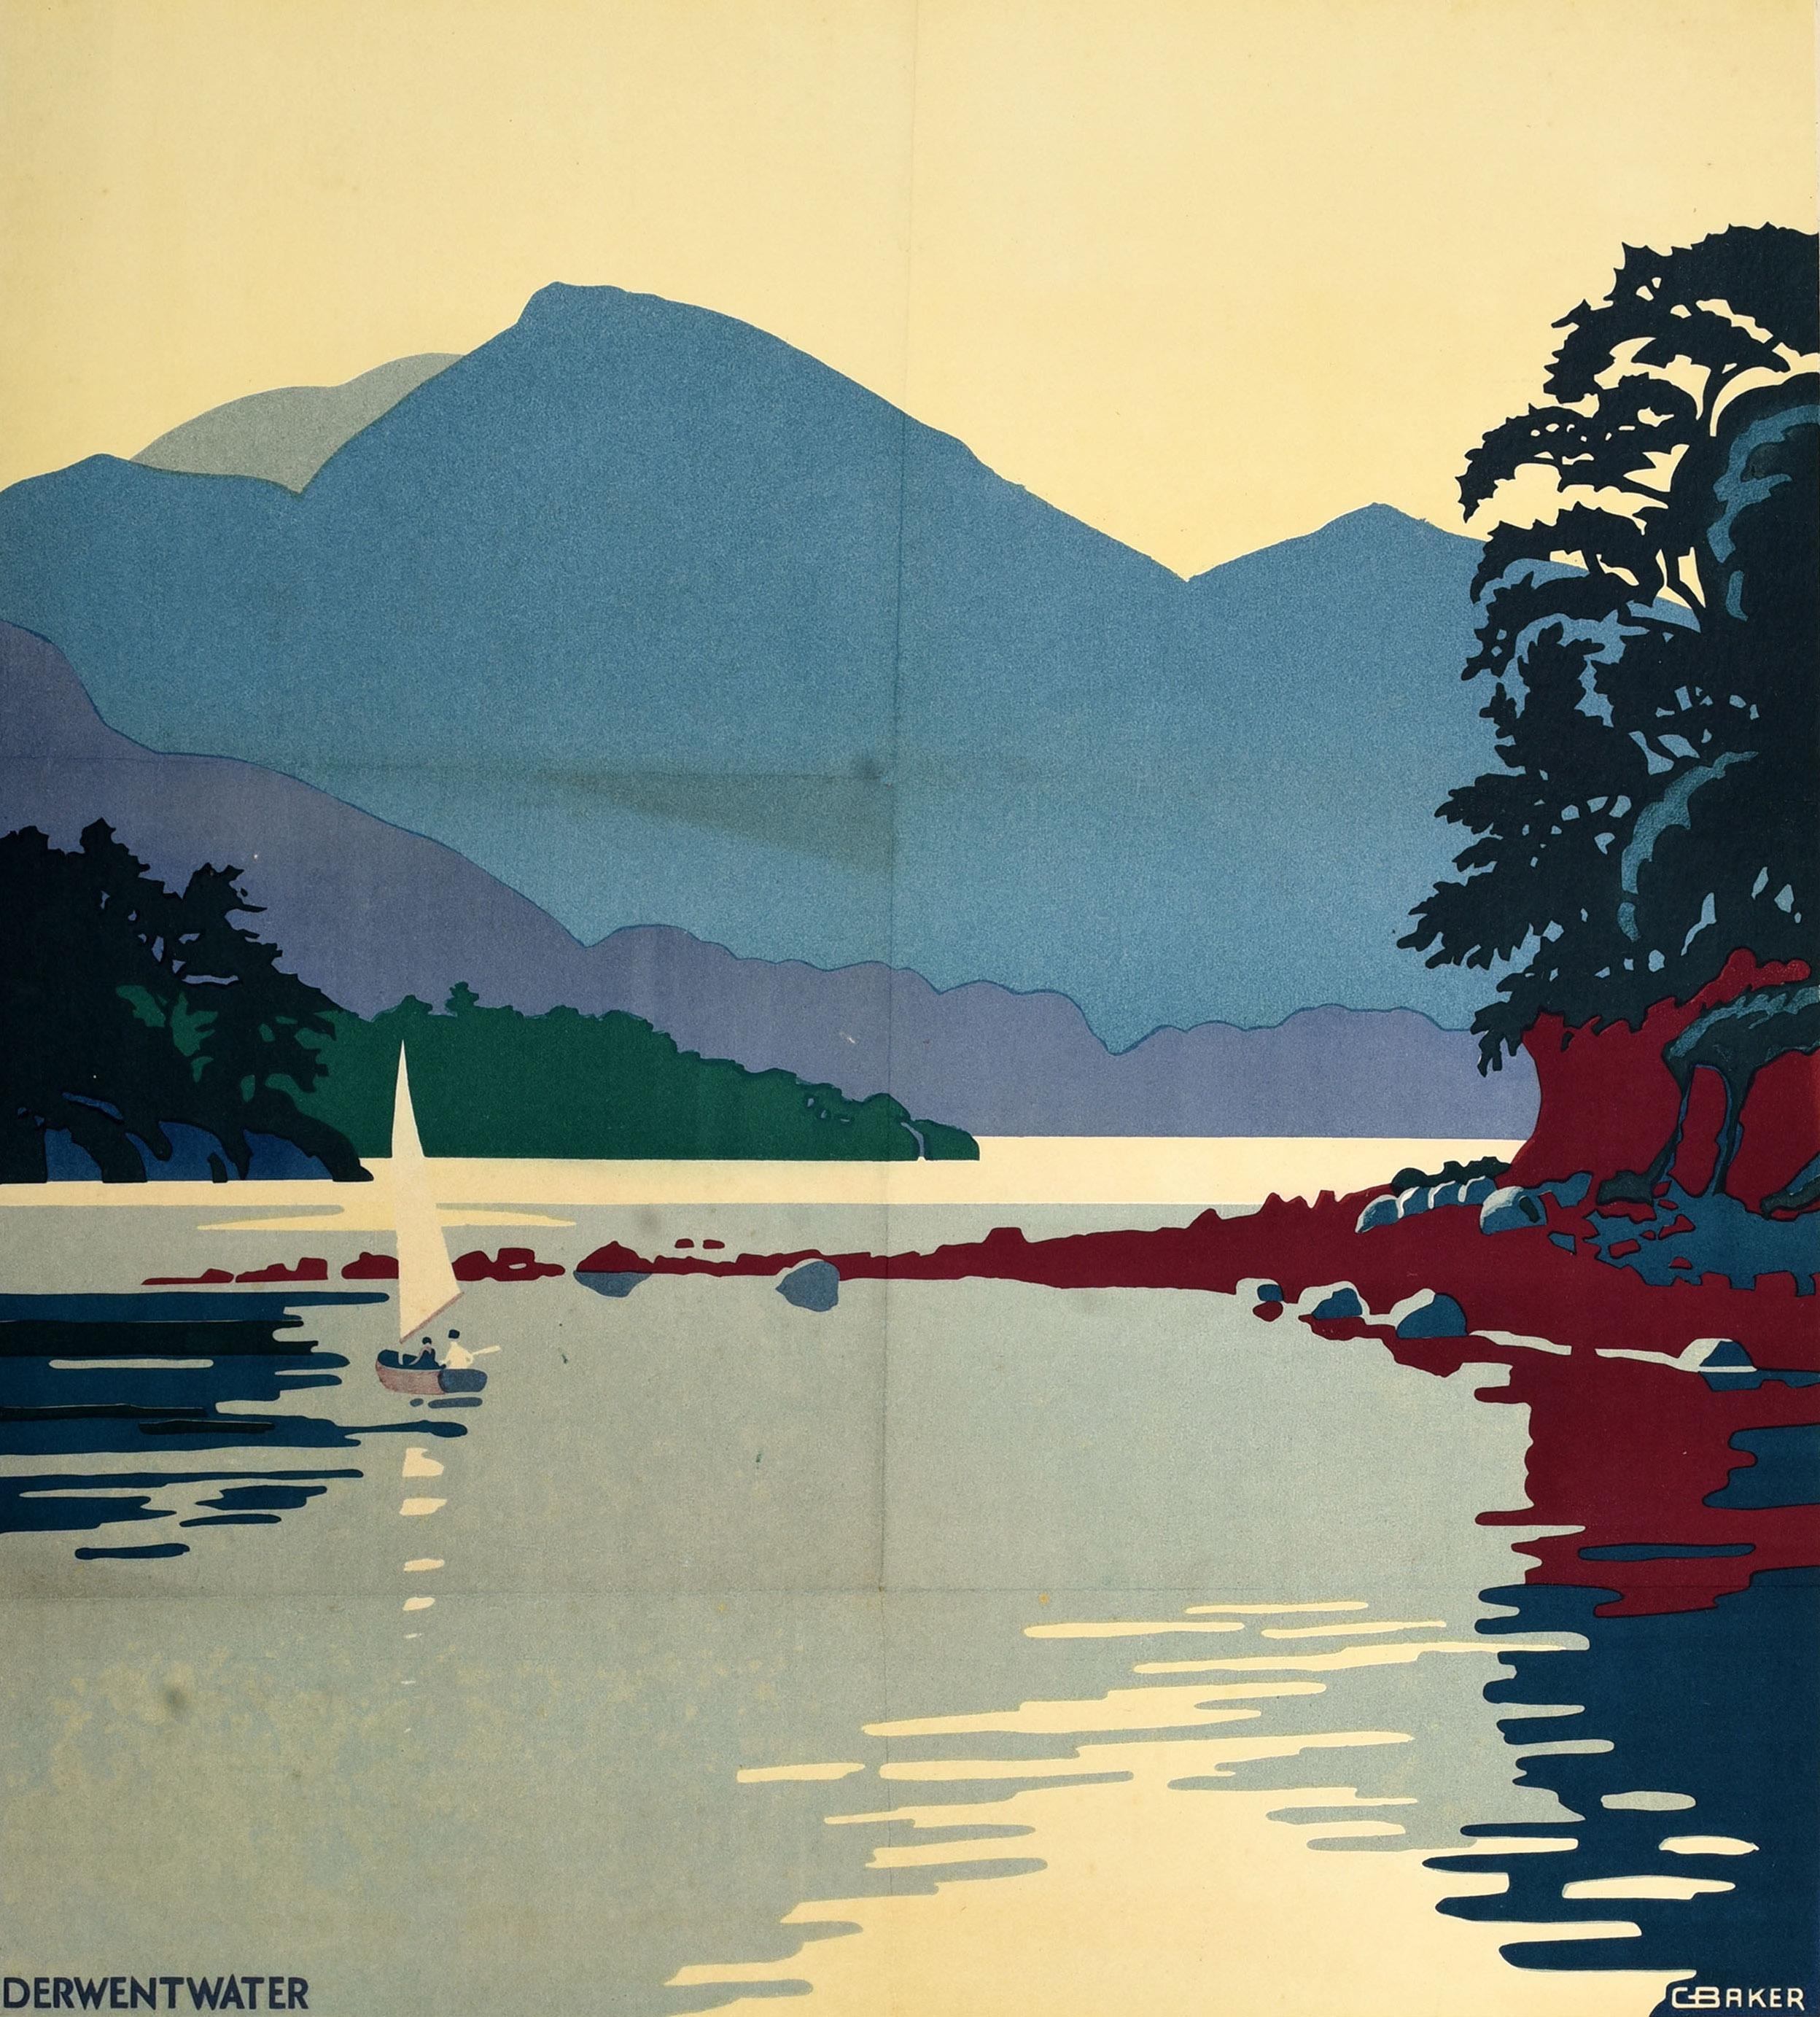 Original vintage LMS London Midland & Scottish railway poster for the Lake District featuring scenic artwork depicting a peaceful view of a sailing boat on Derwentwater with the trees, rocks and hills reflected on the calm water, the title in bold